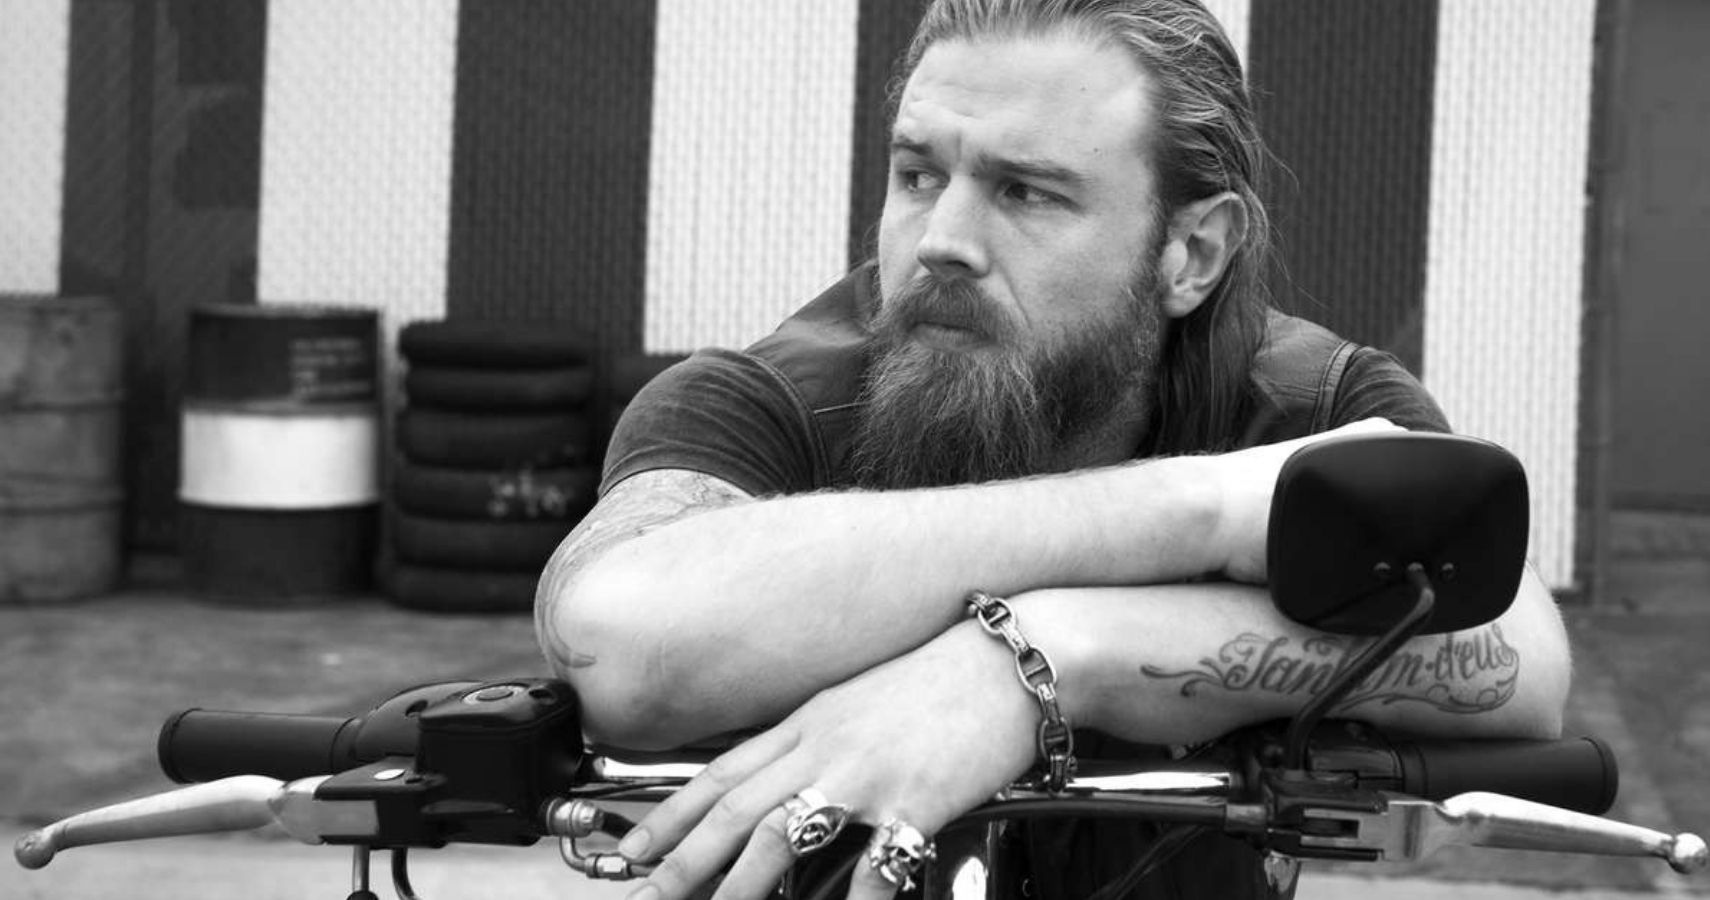 Sons of Anarchy - Ryan Hurst as Opie